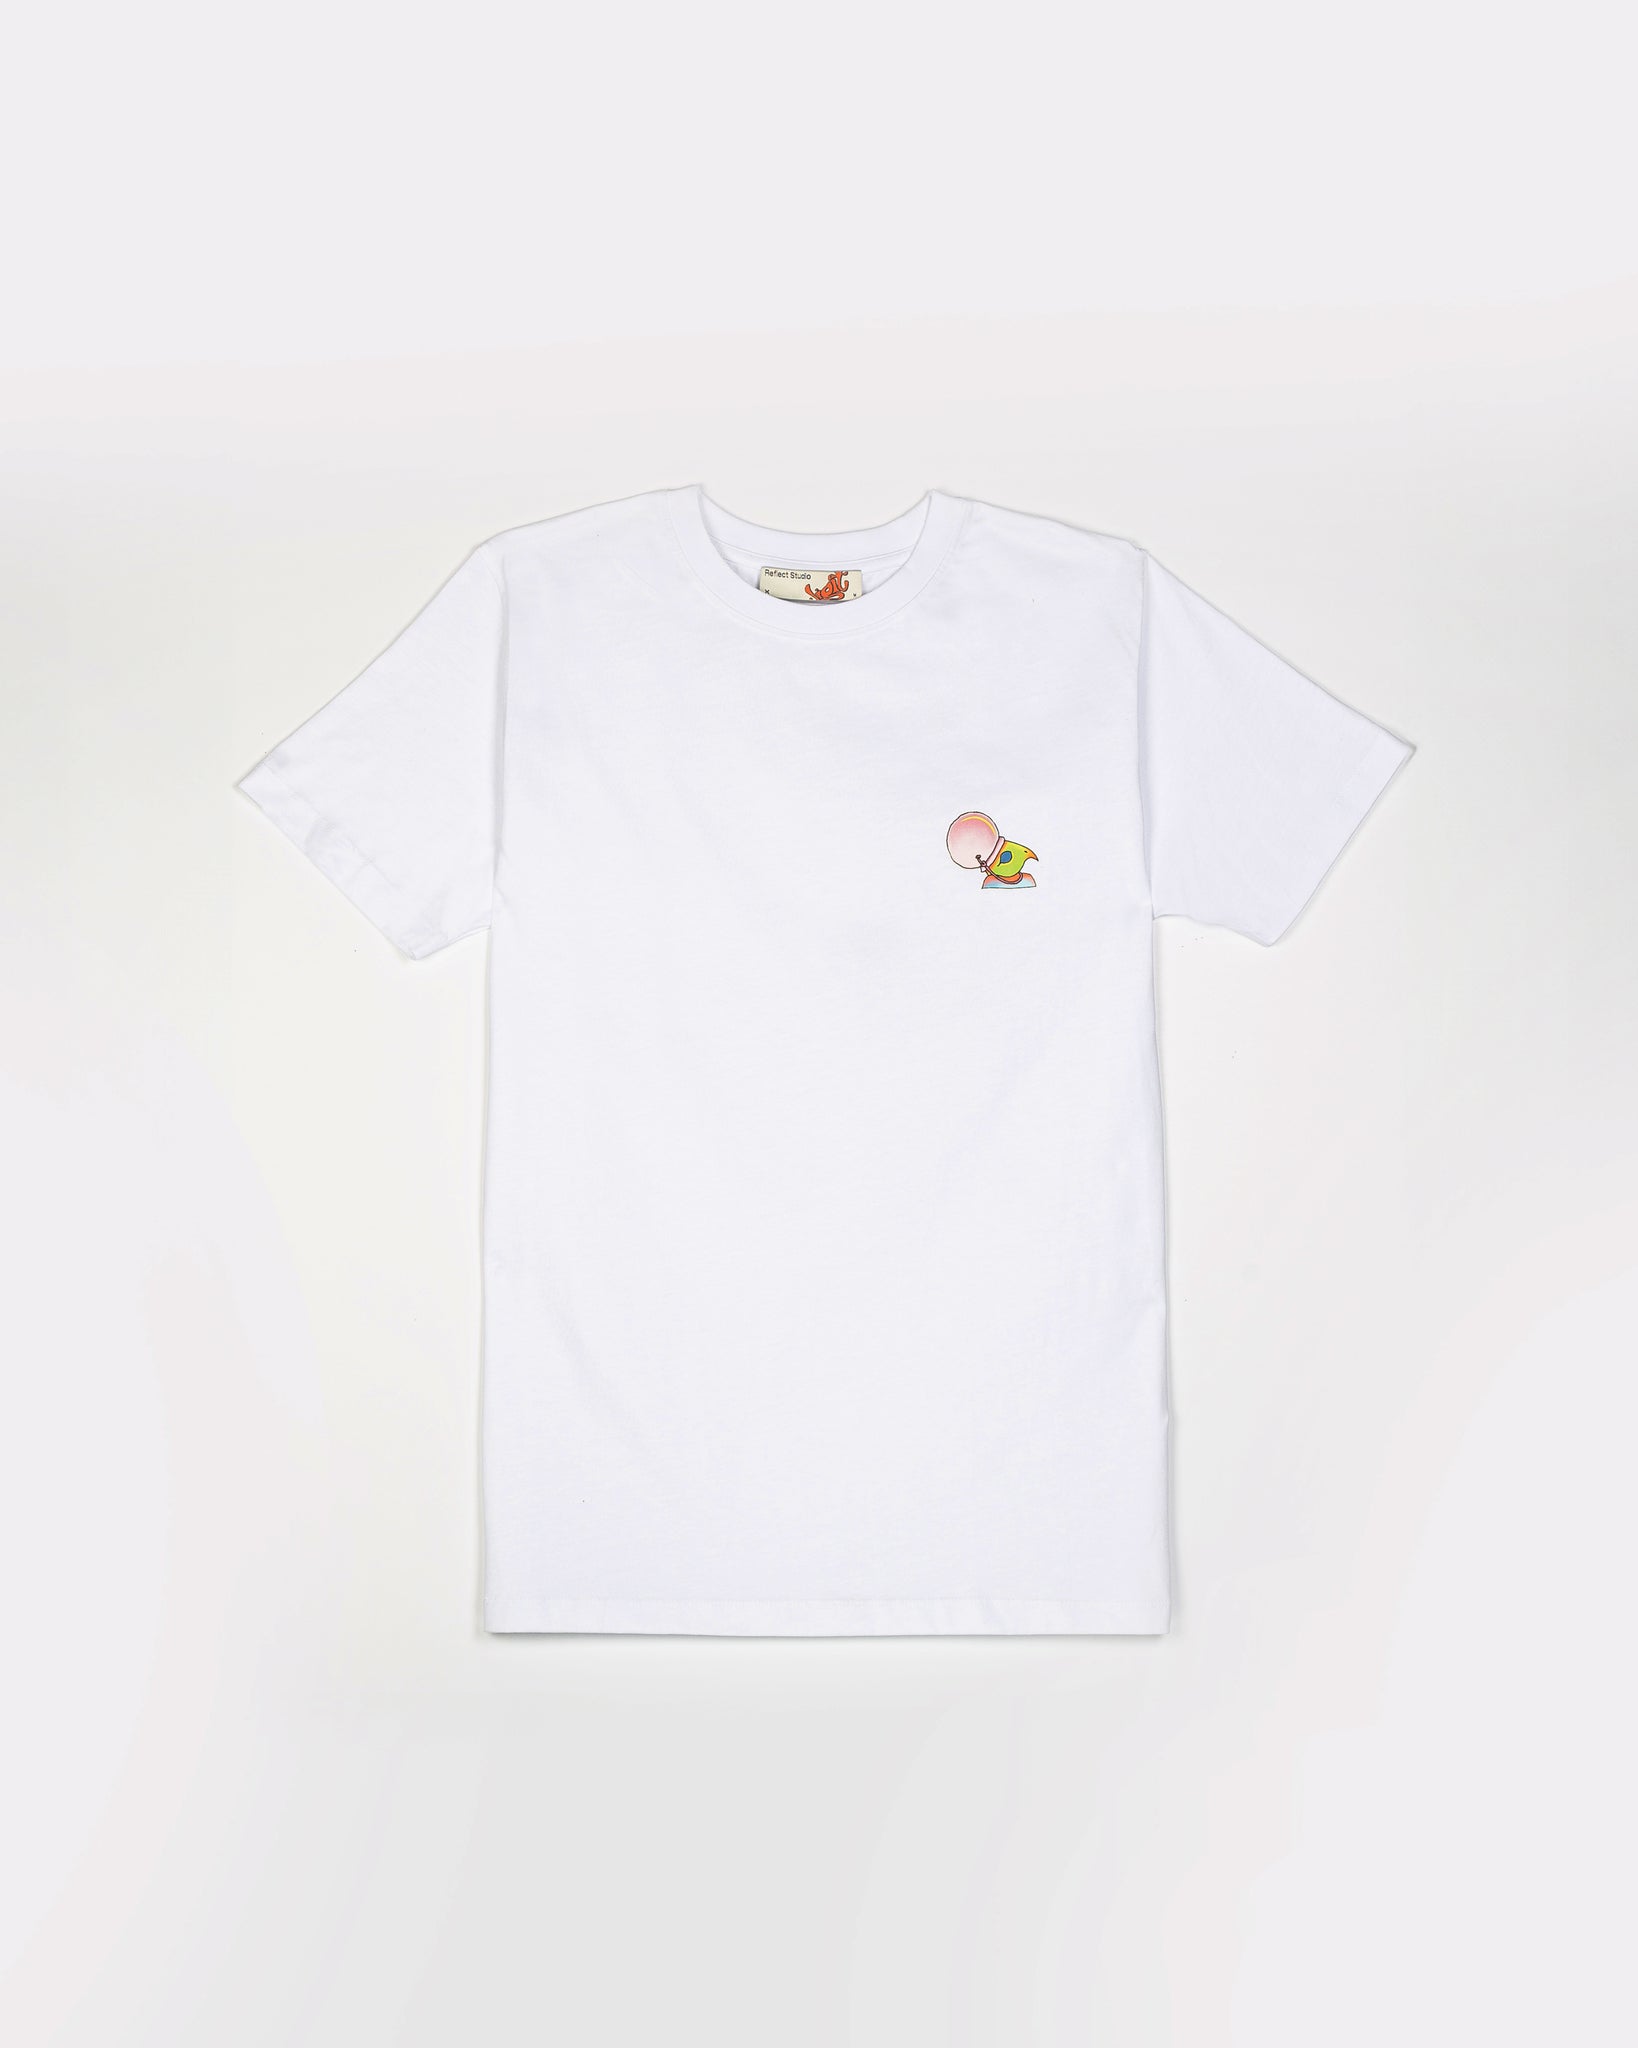 Earthly Delights tee white